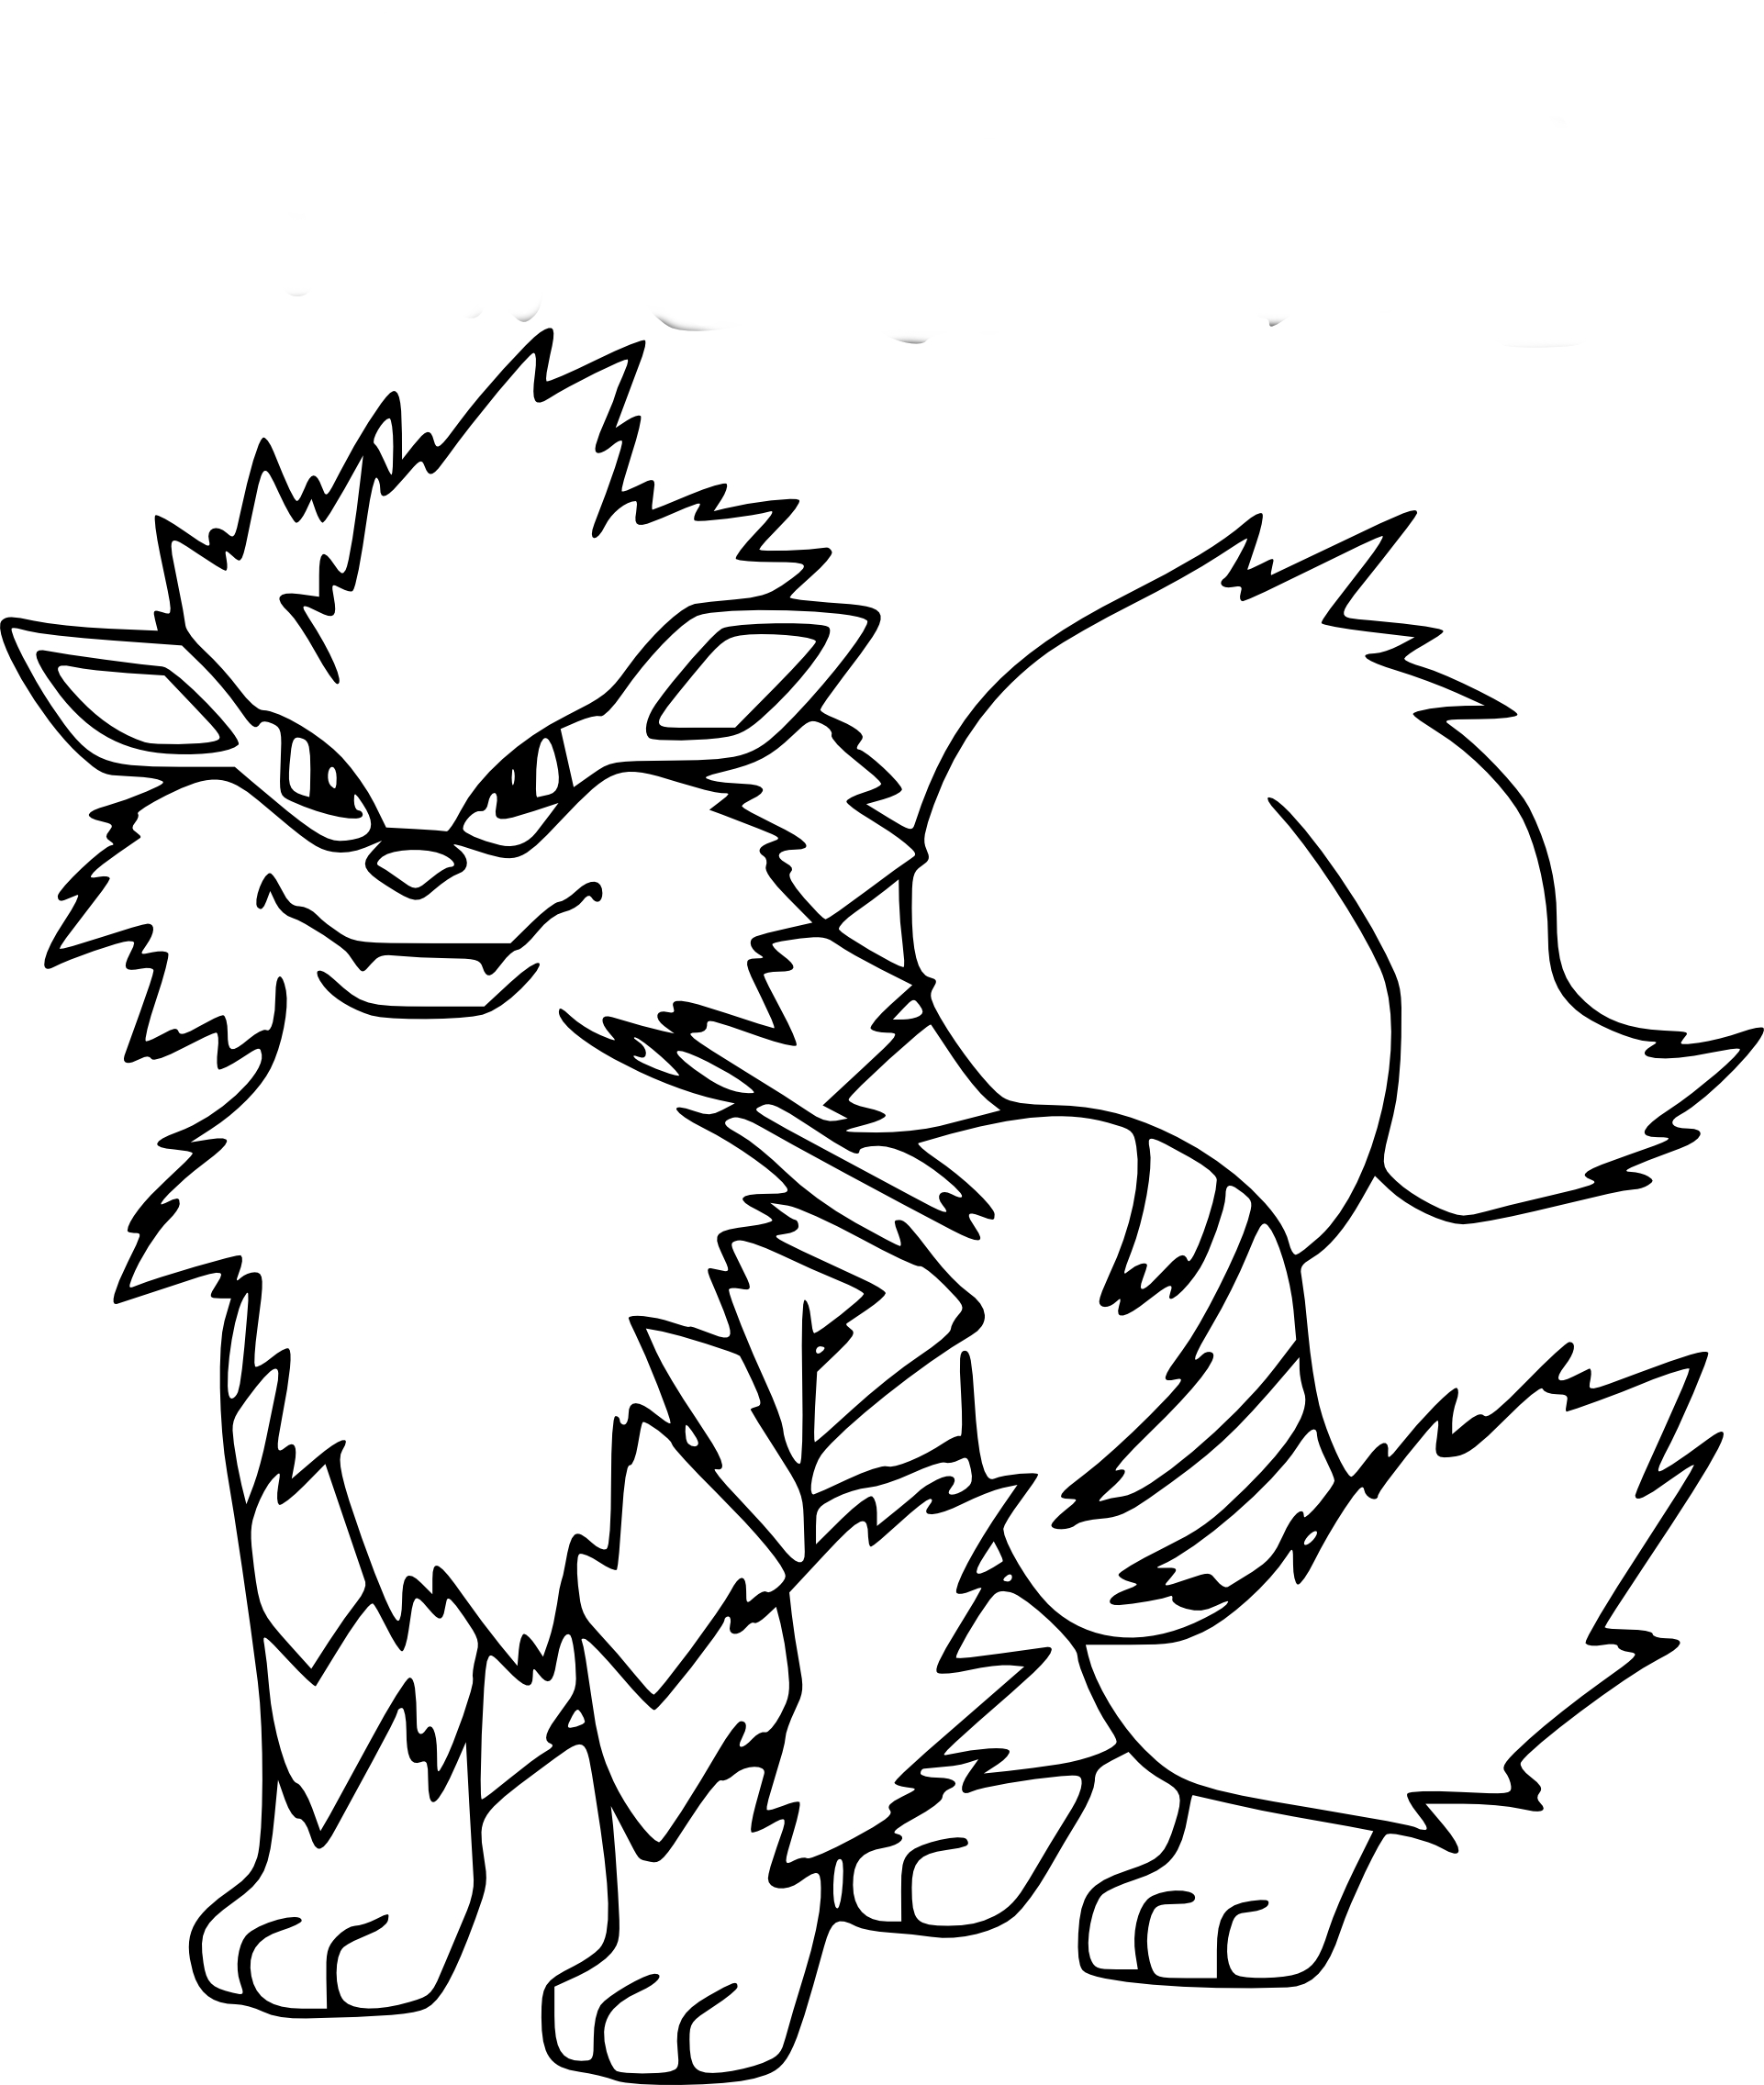 Pokemon Arcanine coloring page